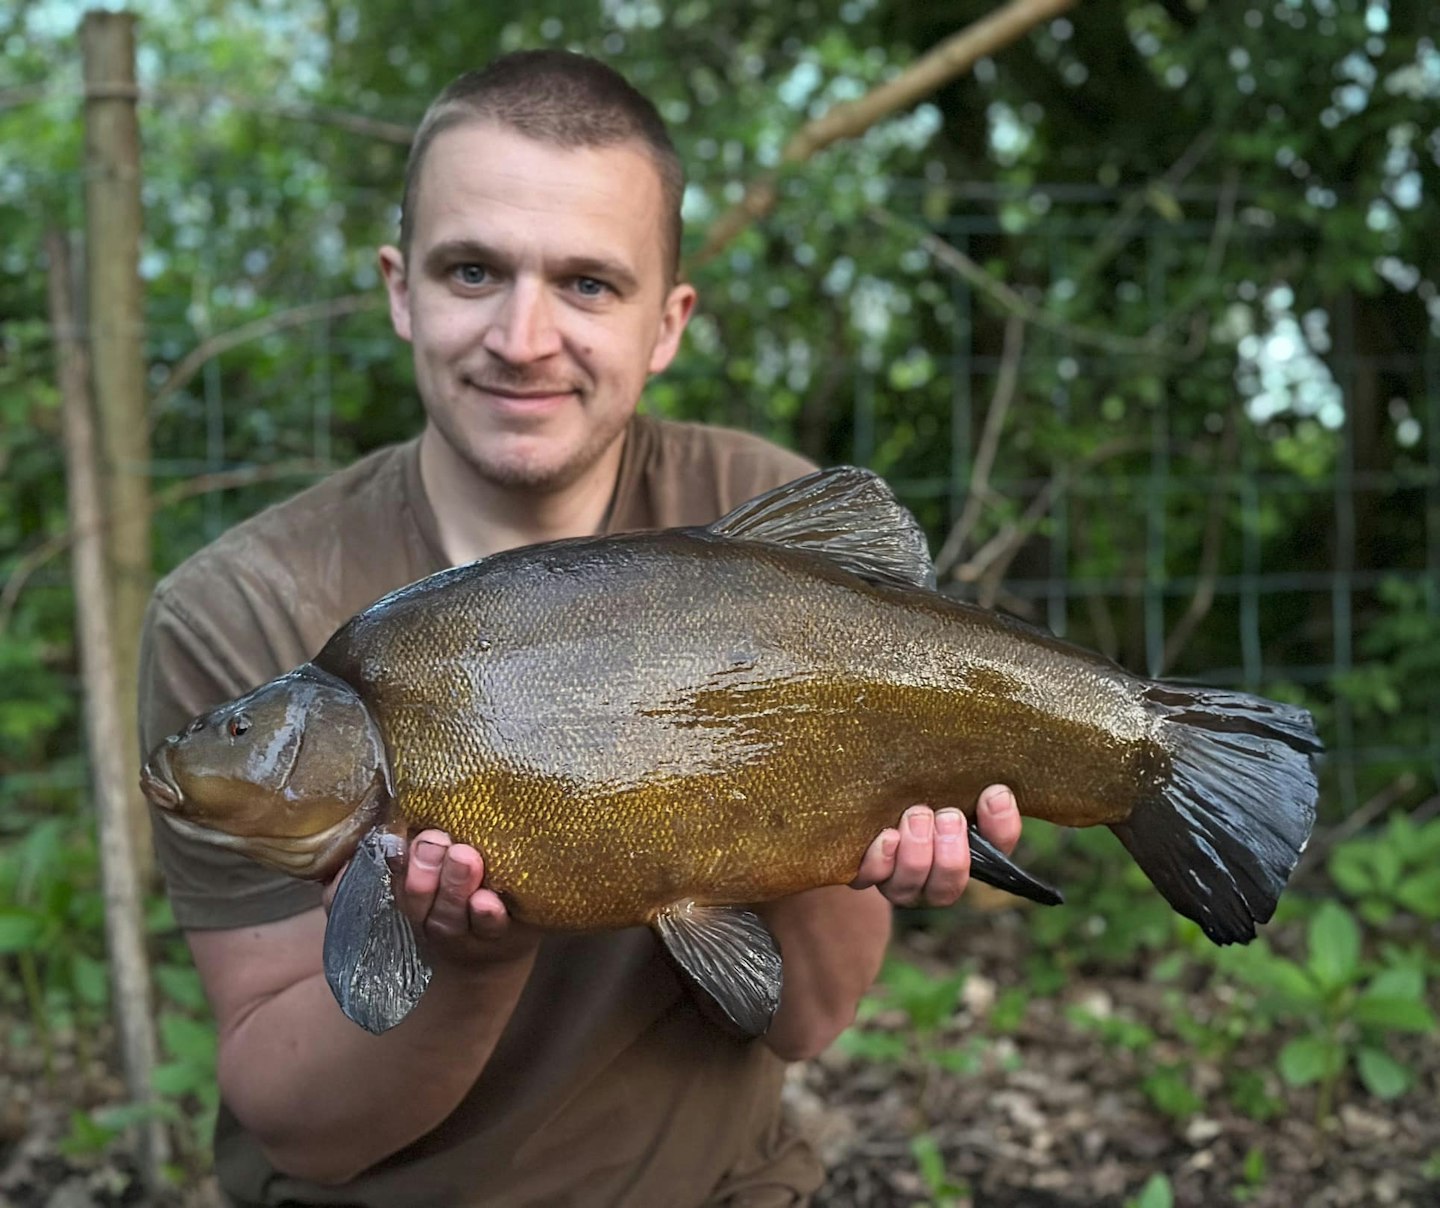 Aaron with his superb 11lb 3oz tench.